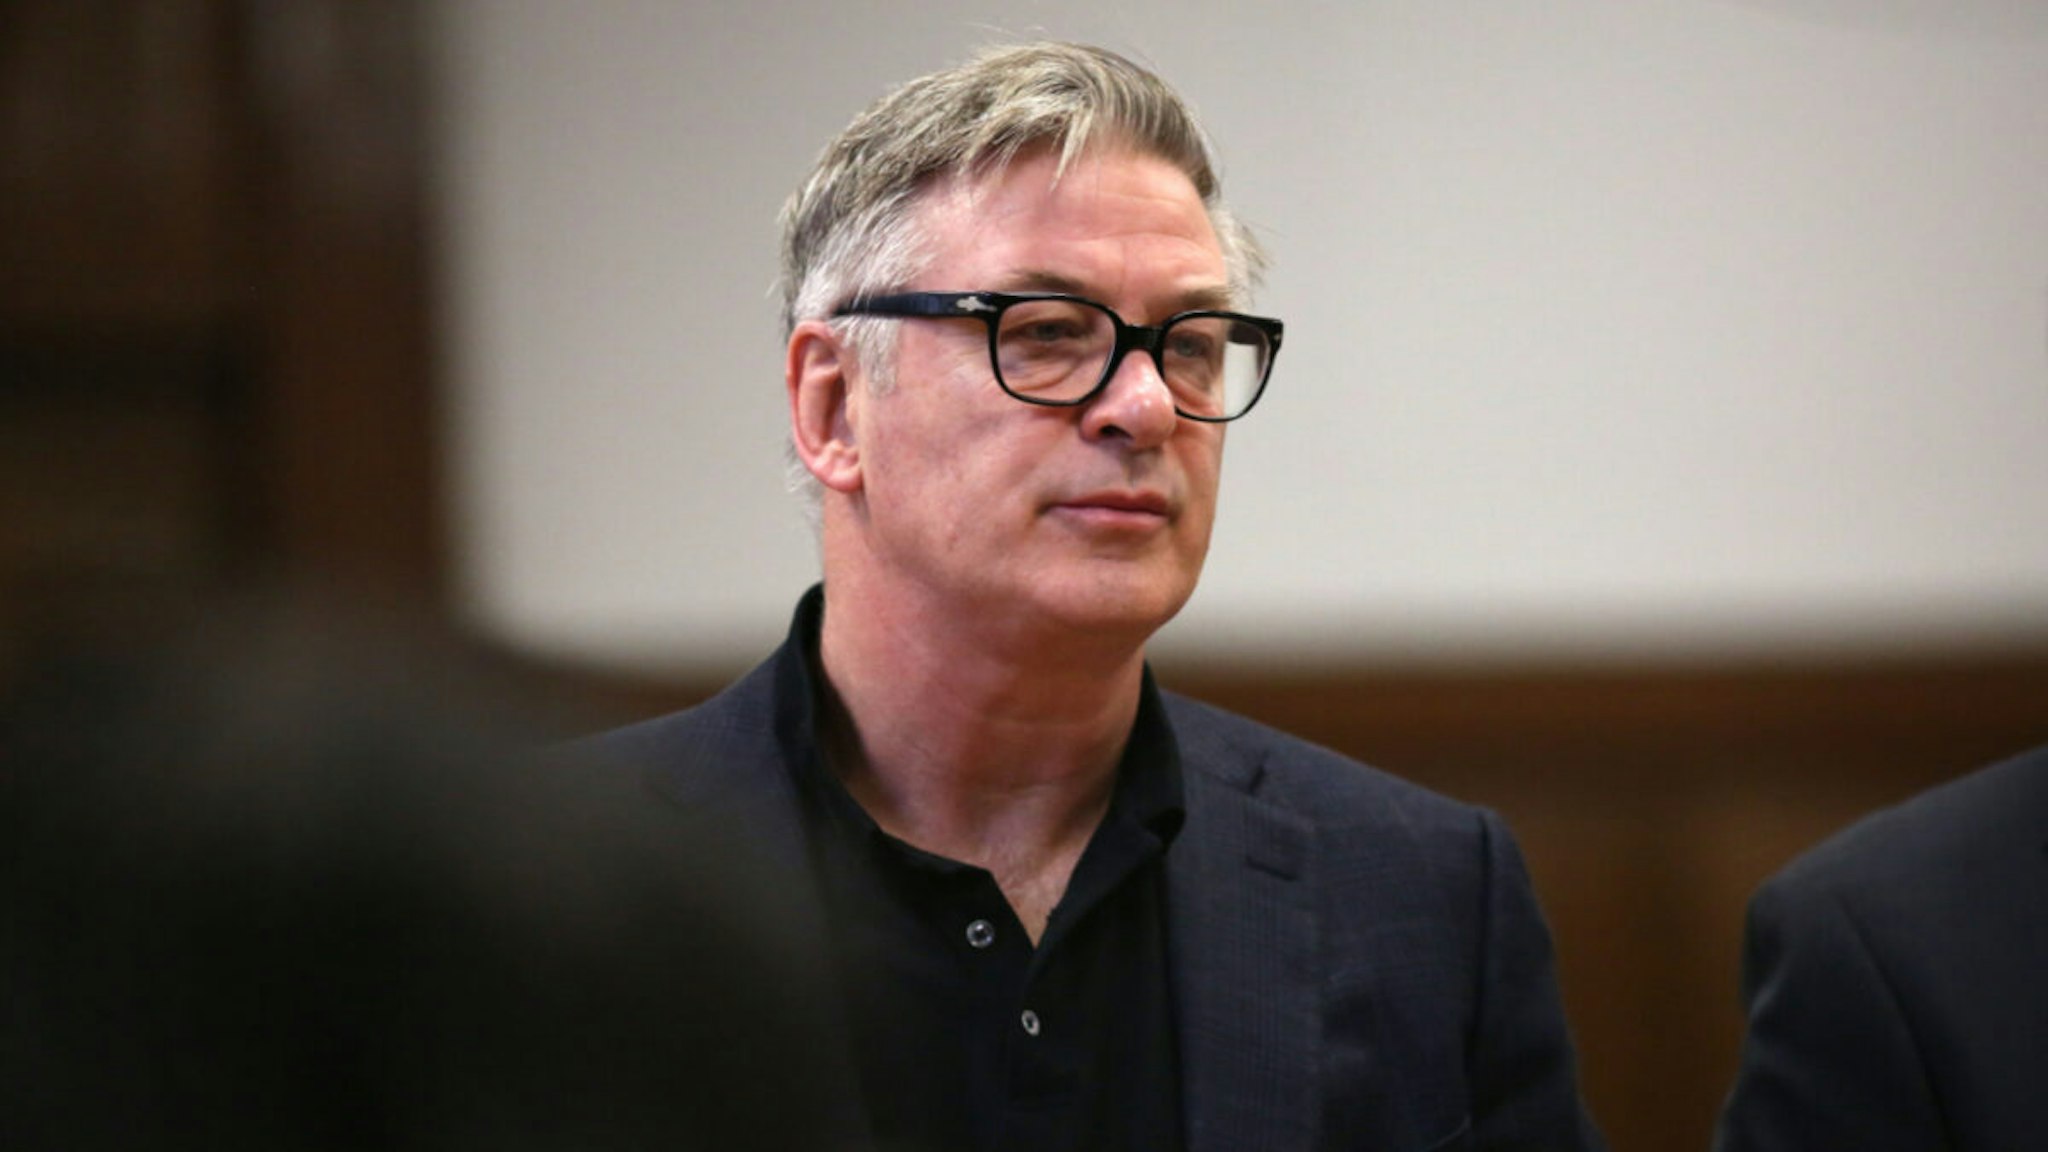 Actor Alec Baldwin appears on January 23, 2019 in Manhattan Criminal Court in New York City.